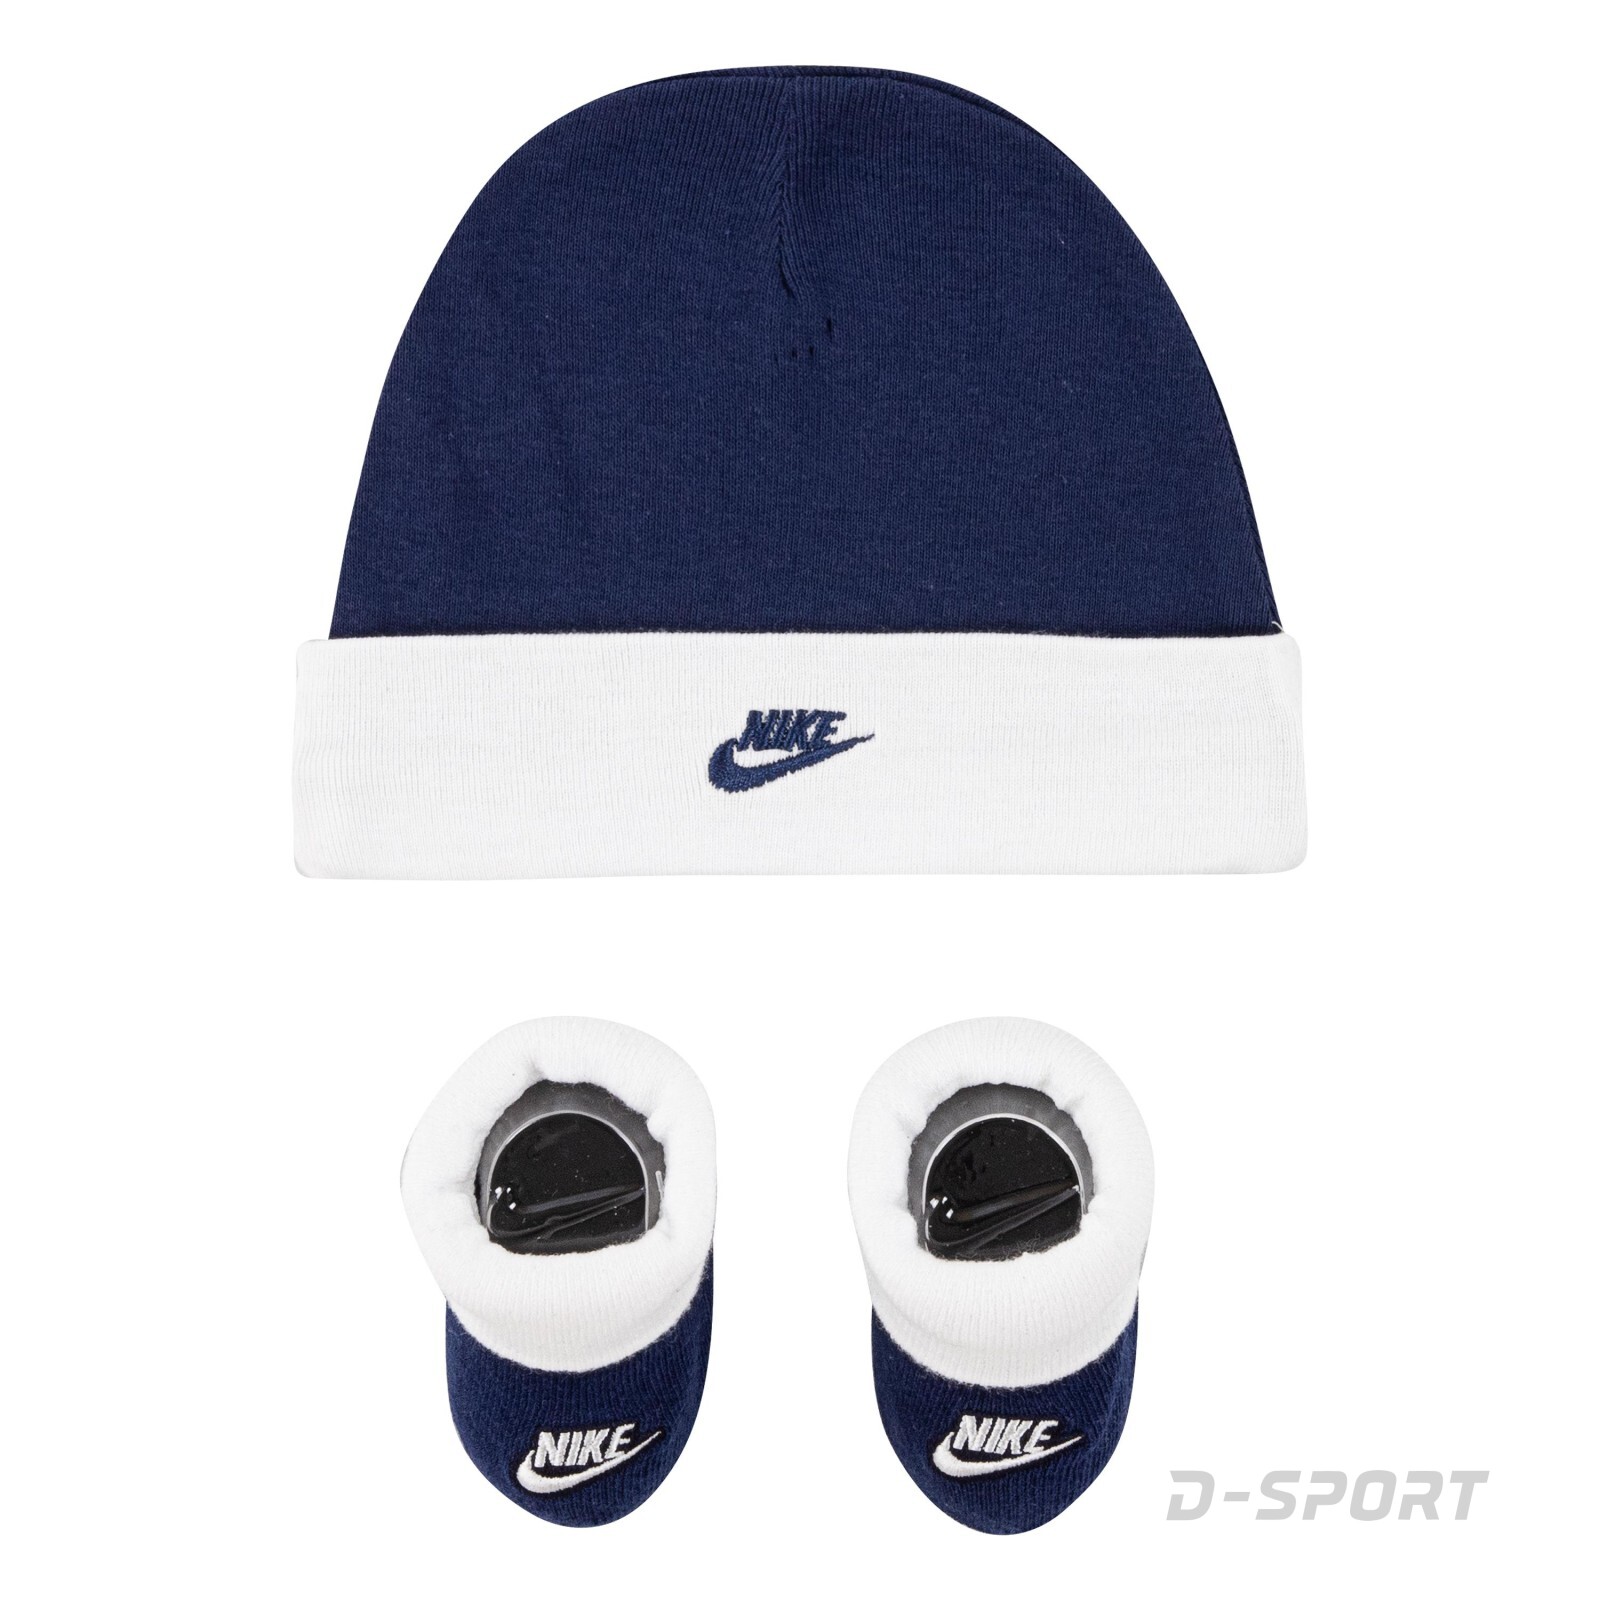 NIKE NIKE FUTURA HAT AND BOOTIE